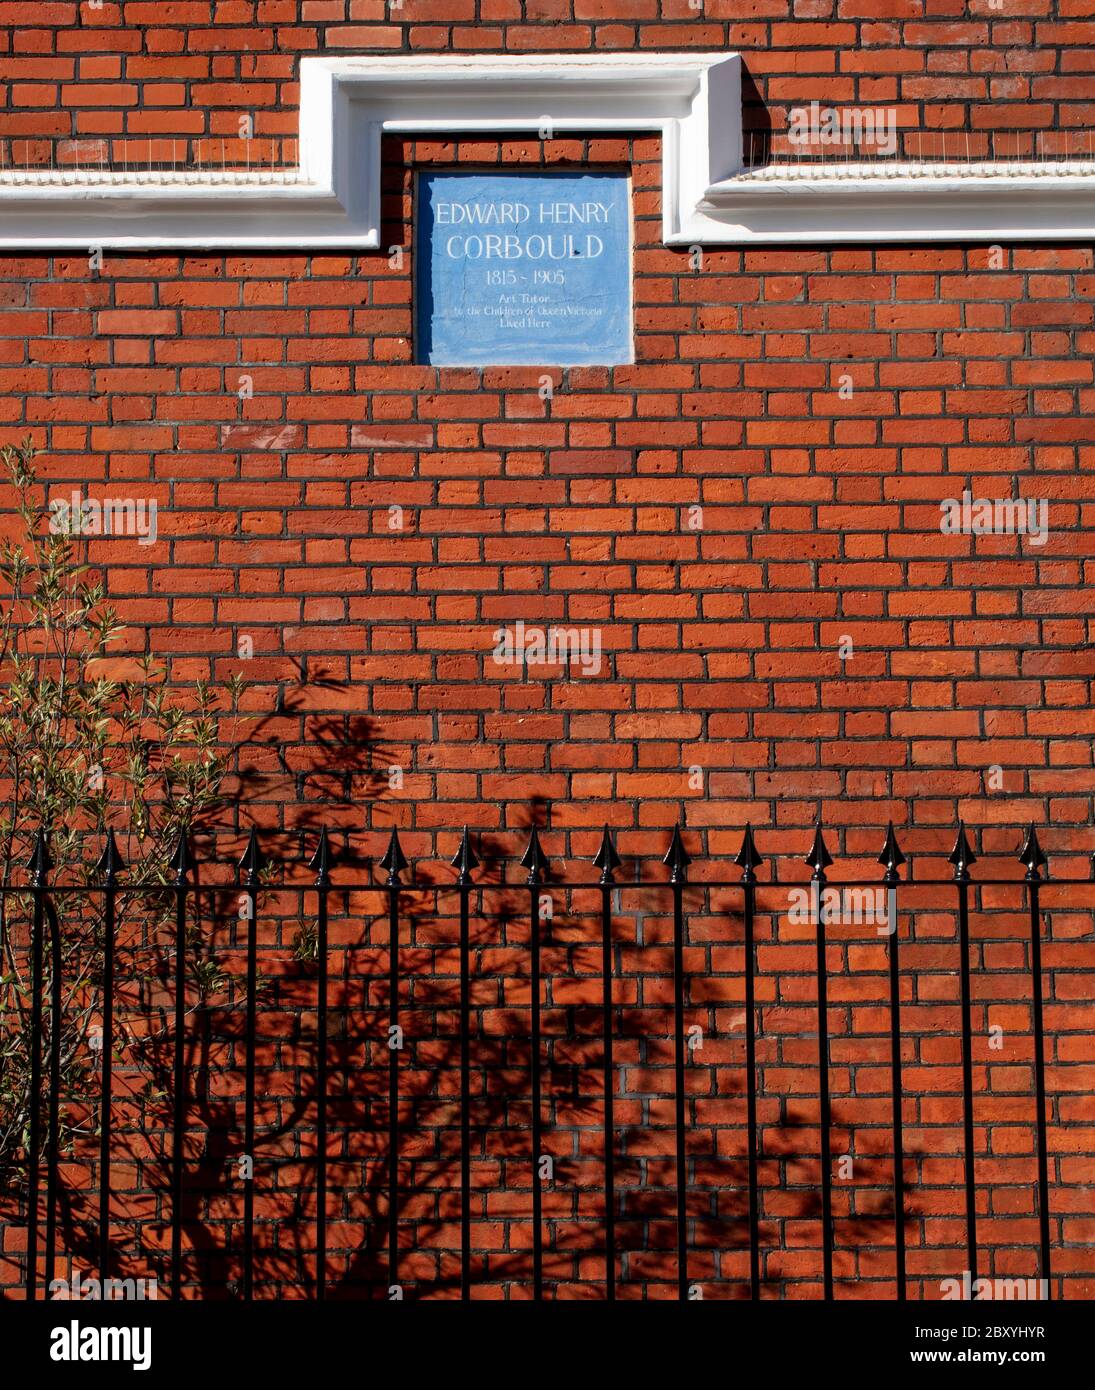 Blue Plaque commemorating Edward Henry Corbould, R.I., 1815-1905, historical painter and watercolourist, in Kensington, London. Stock Photo